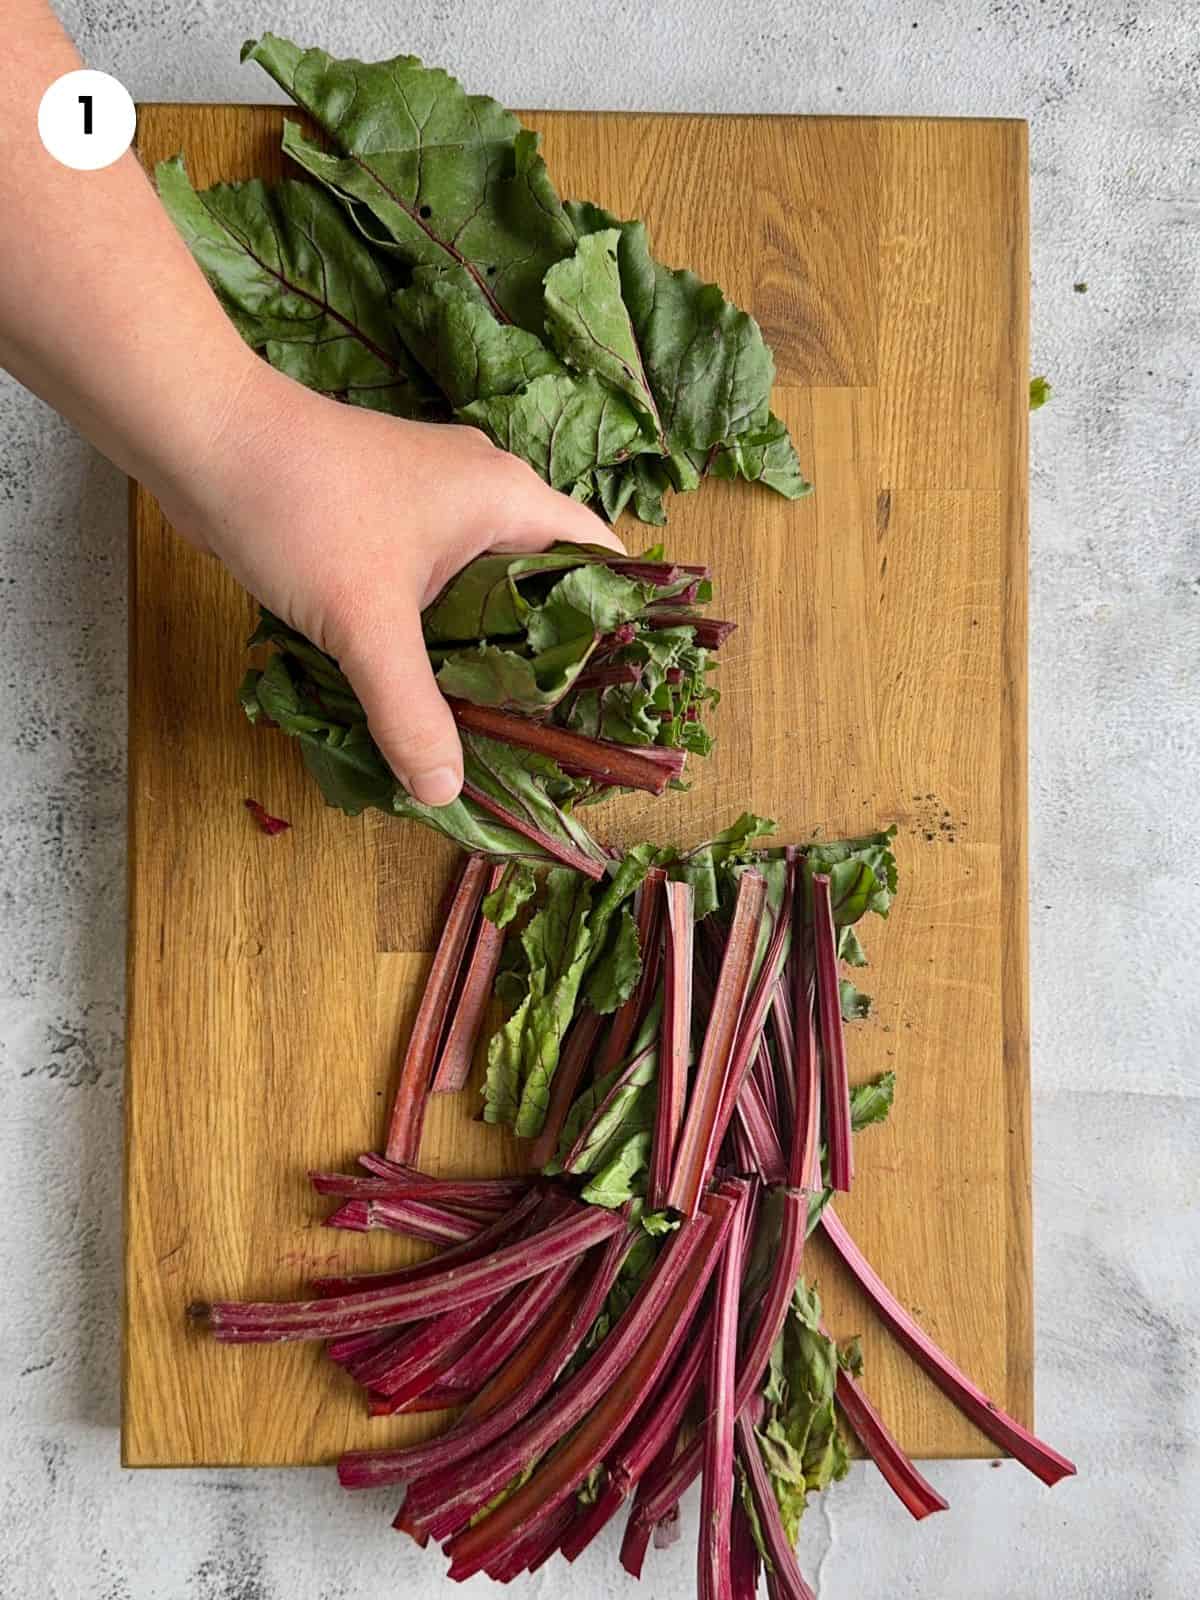 Cutting the beets leaves into smaller bits.